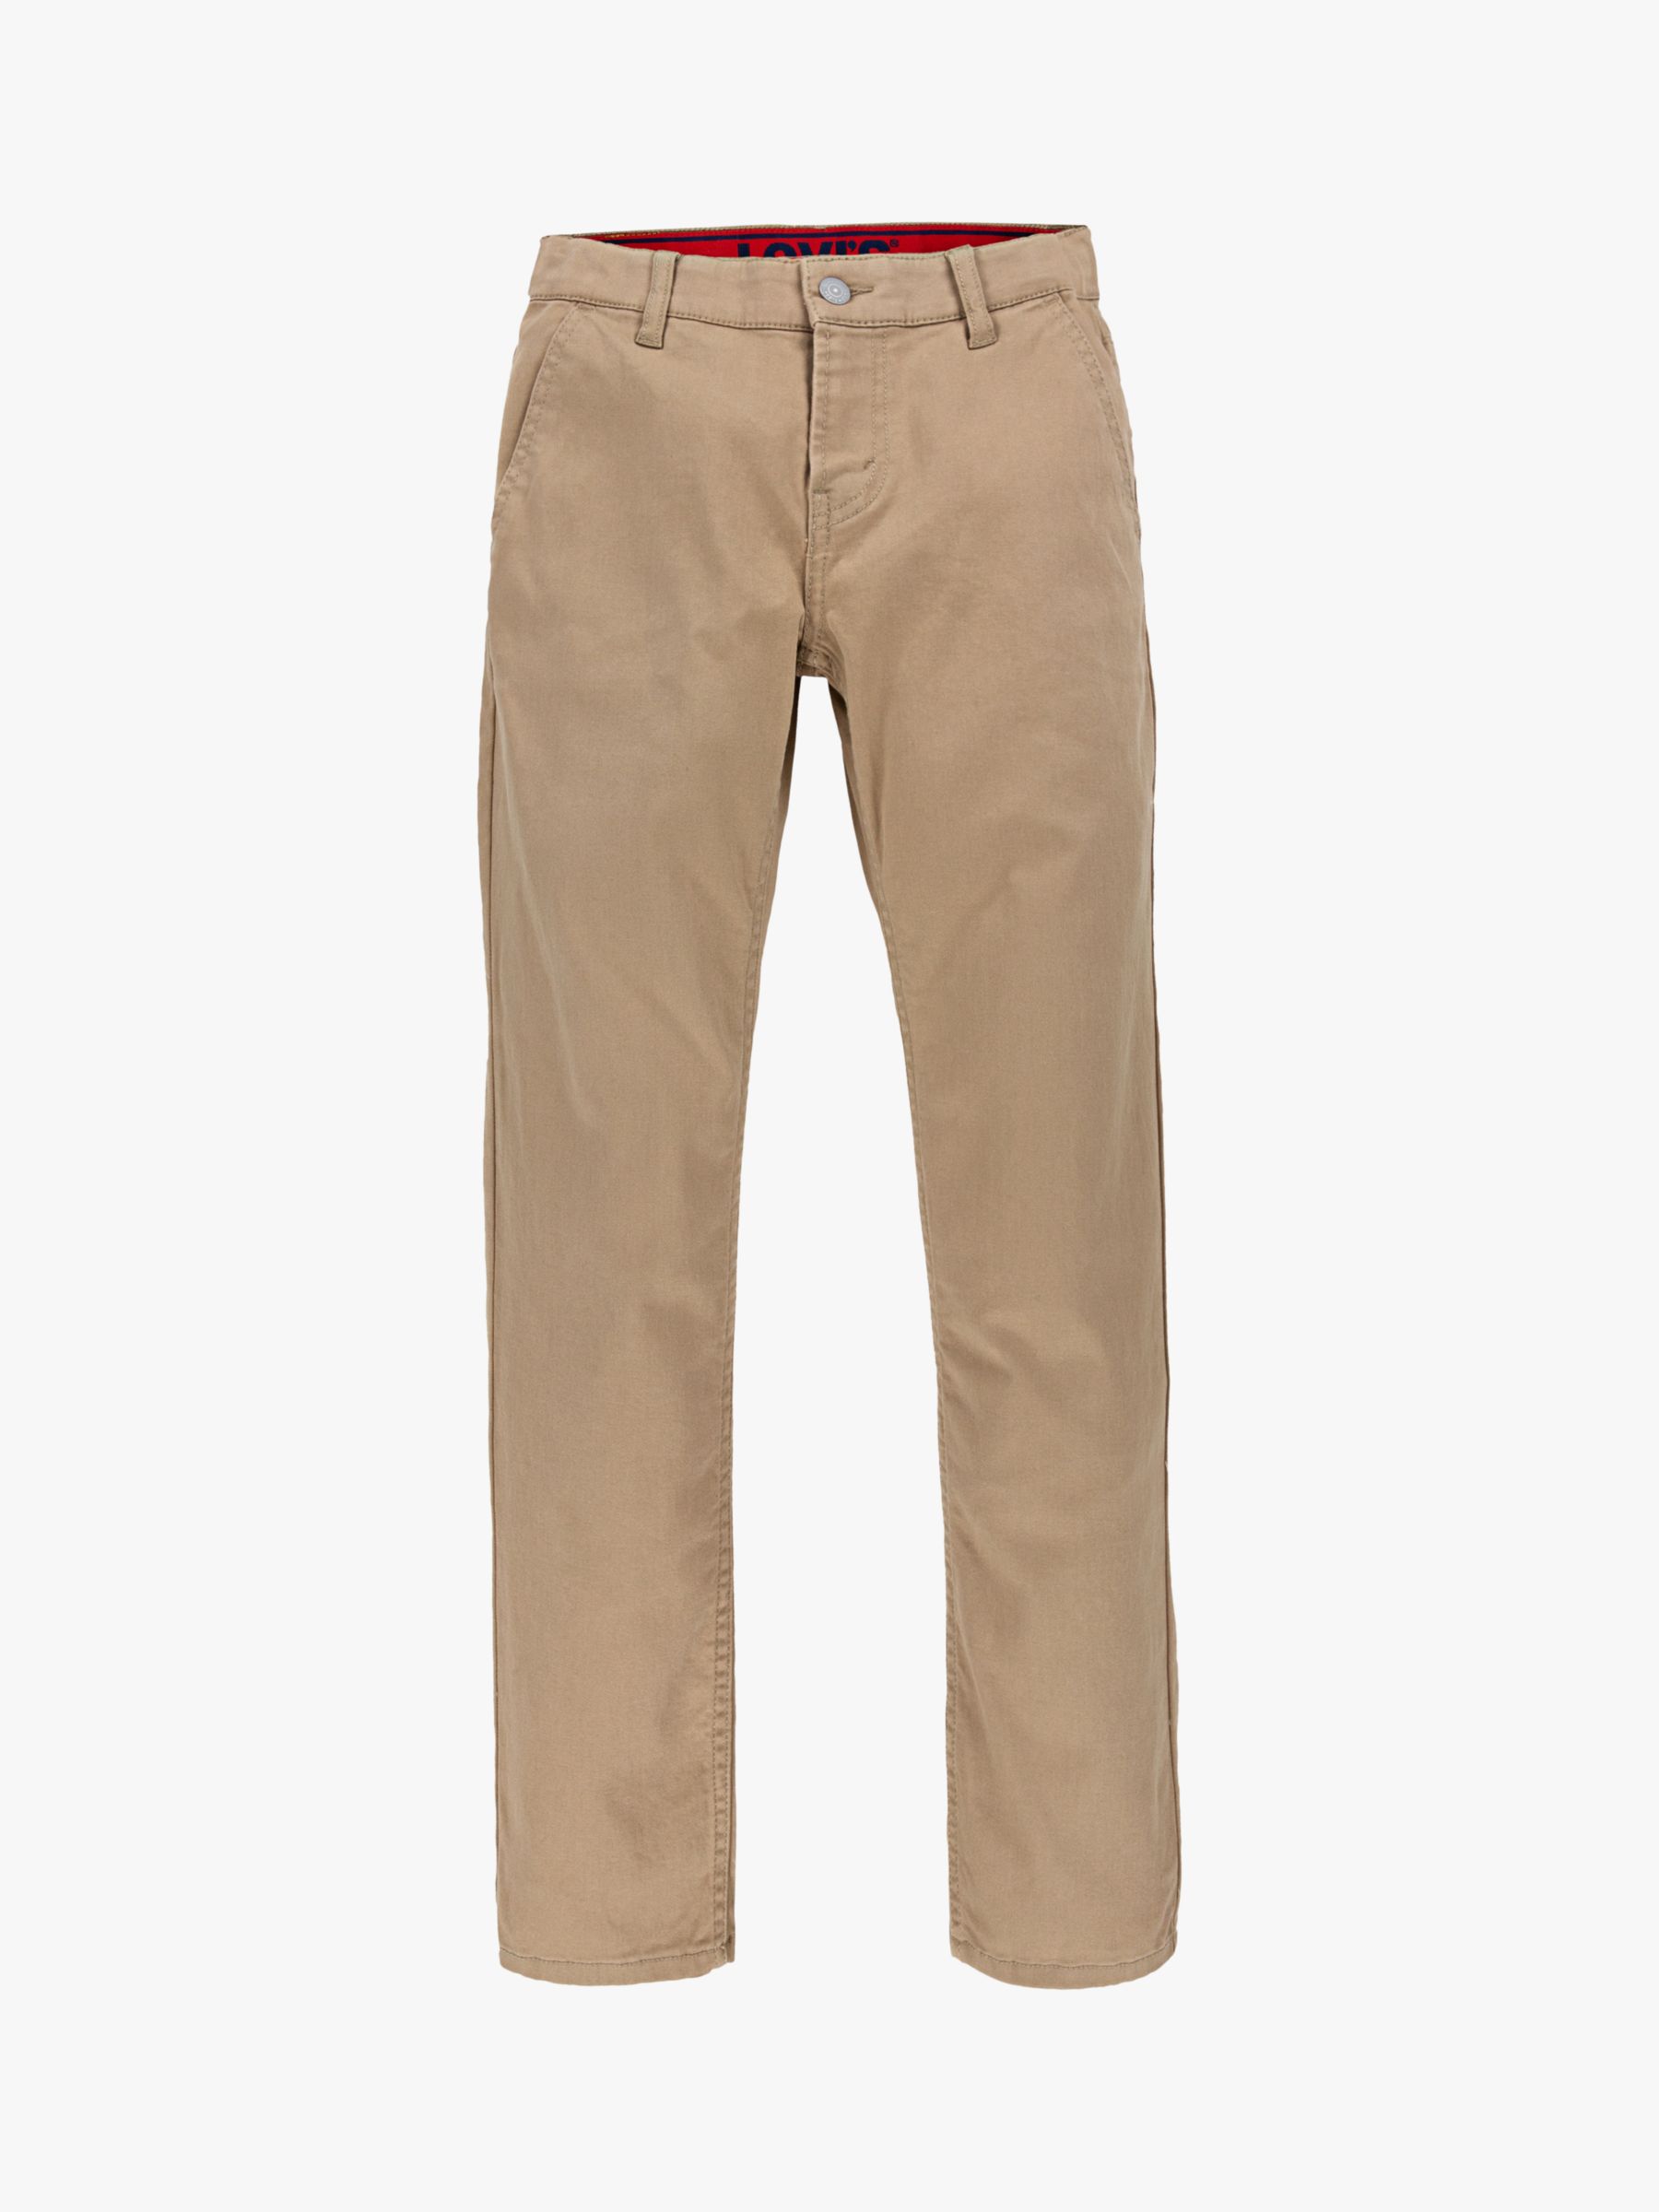 Image of Levis Boys 502 Tapered Chinos Harvest Gold